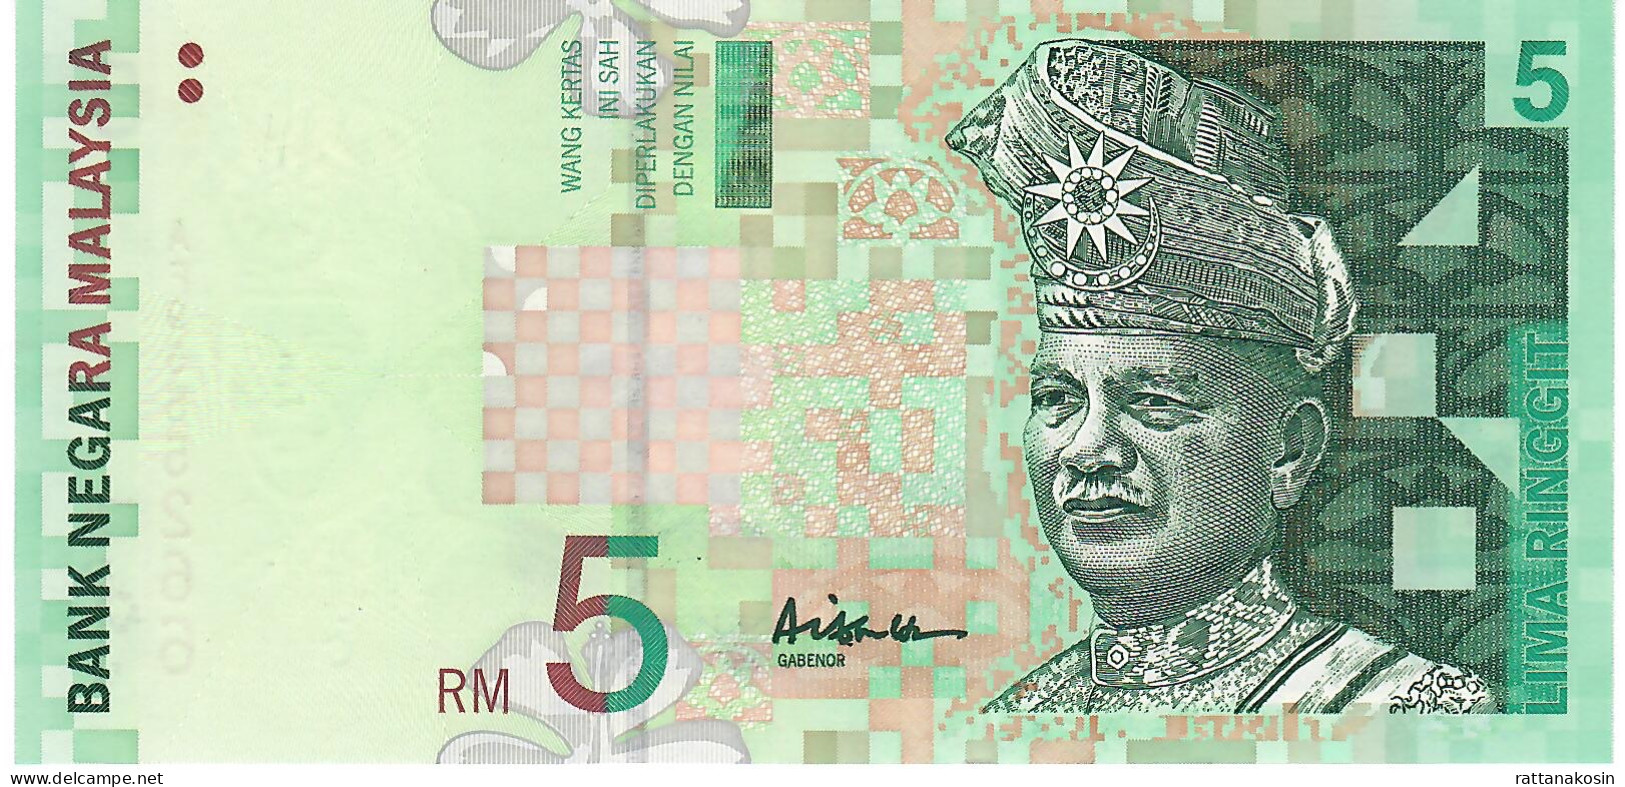 MALAYSIA  P41a 5 RINGGIT  1999  #AF UNC. - Maleisië